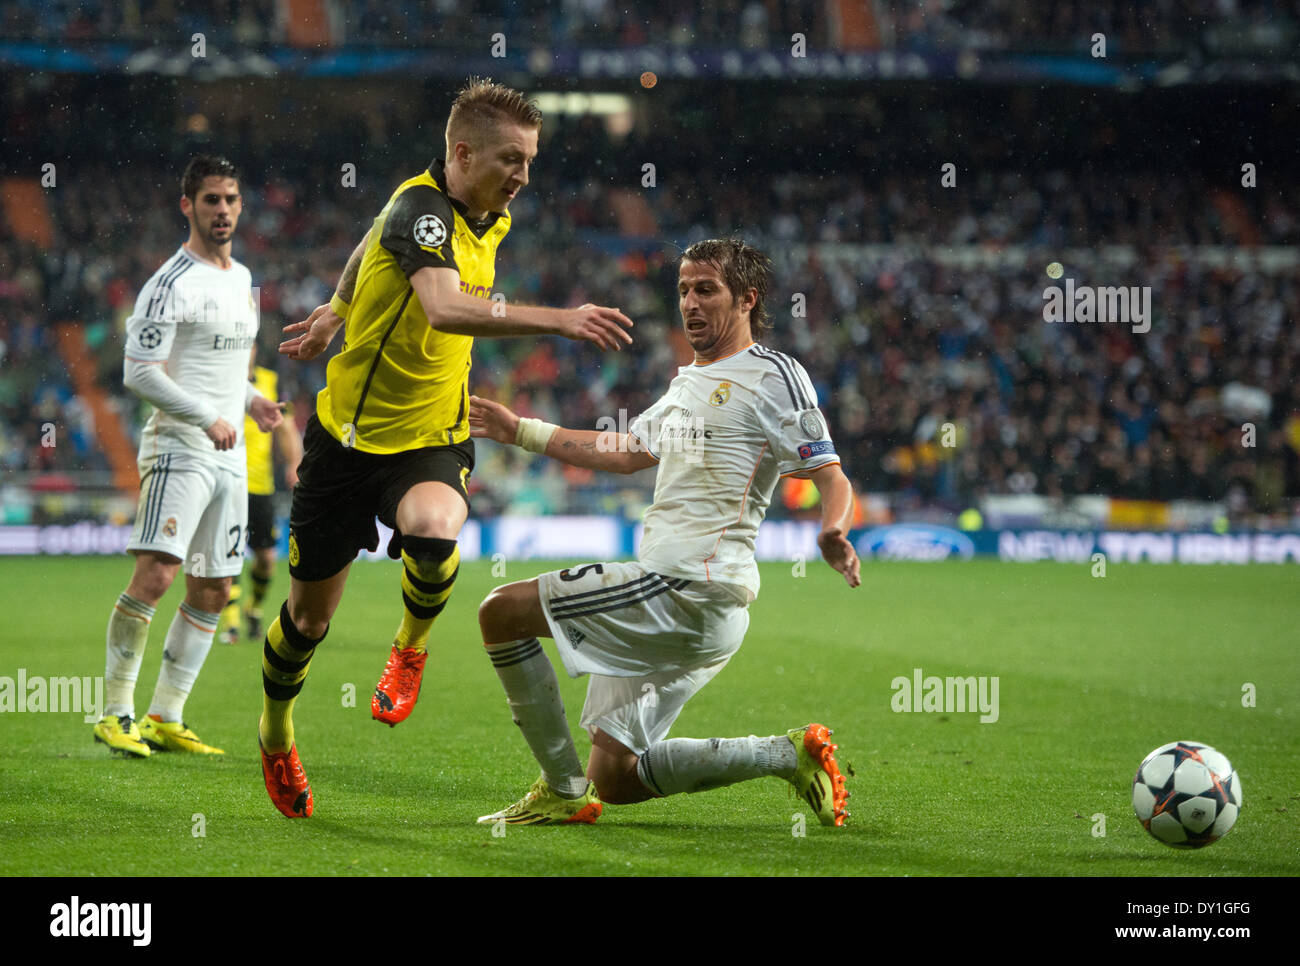 Madrid, Spain. 02nd Apr, 2014. Marco Reus (L) of Dortmund and Real Madrid's Fabio Coentrao vie for the ball during the UEFA Champions League quarter final first leg soccer match between Real Madrid and Borussia Dortmund at Santiago Bernabeu stadium in Madrid, Spain, 02 April 2014. Photo: Bernd Thissen/dpa/Alamy Live News Stock Photo